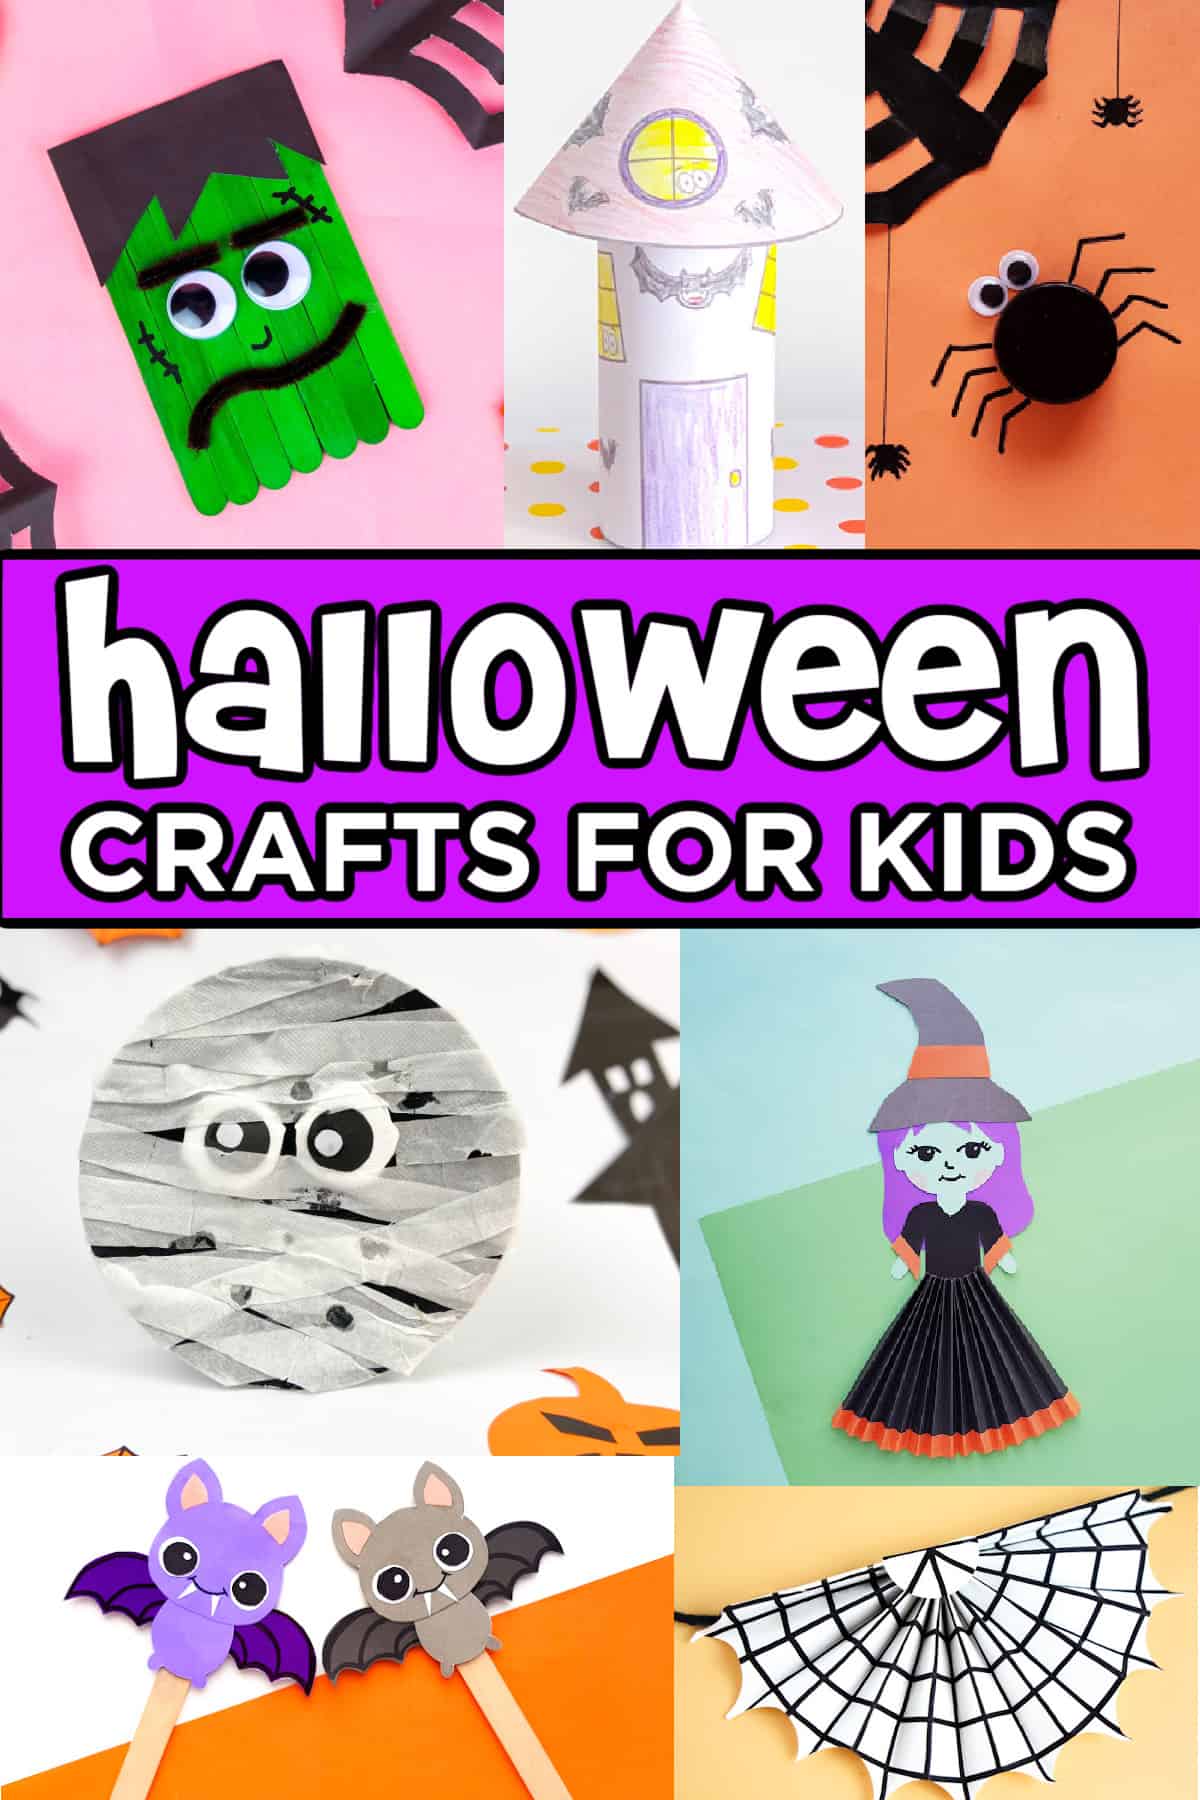 50+ Paper Crafts for Kids Provide Hours of Fun! - DIY Candy